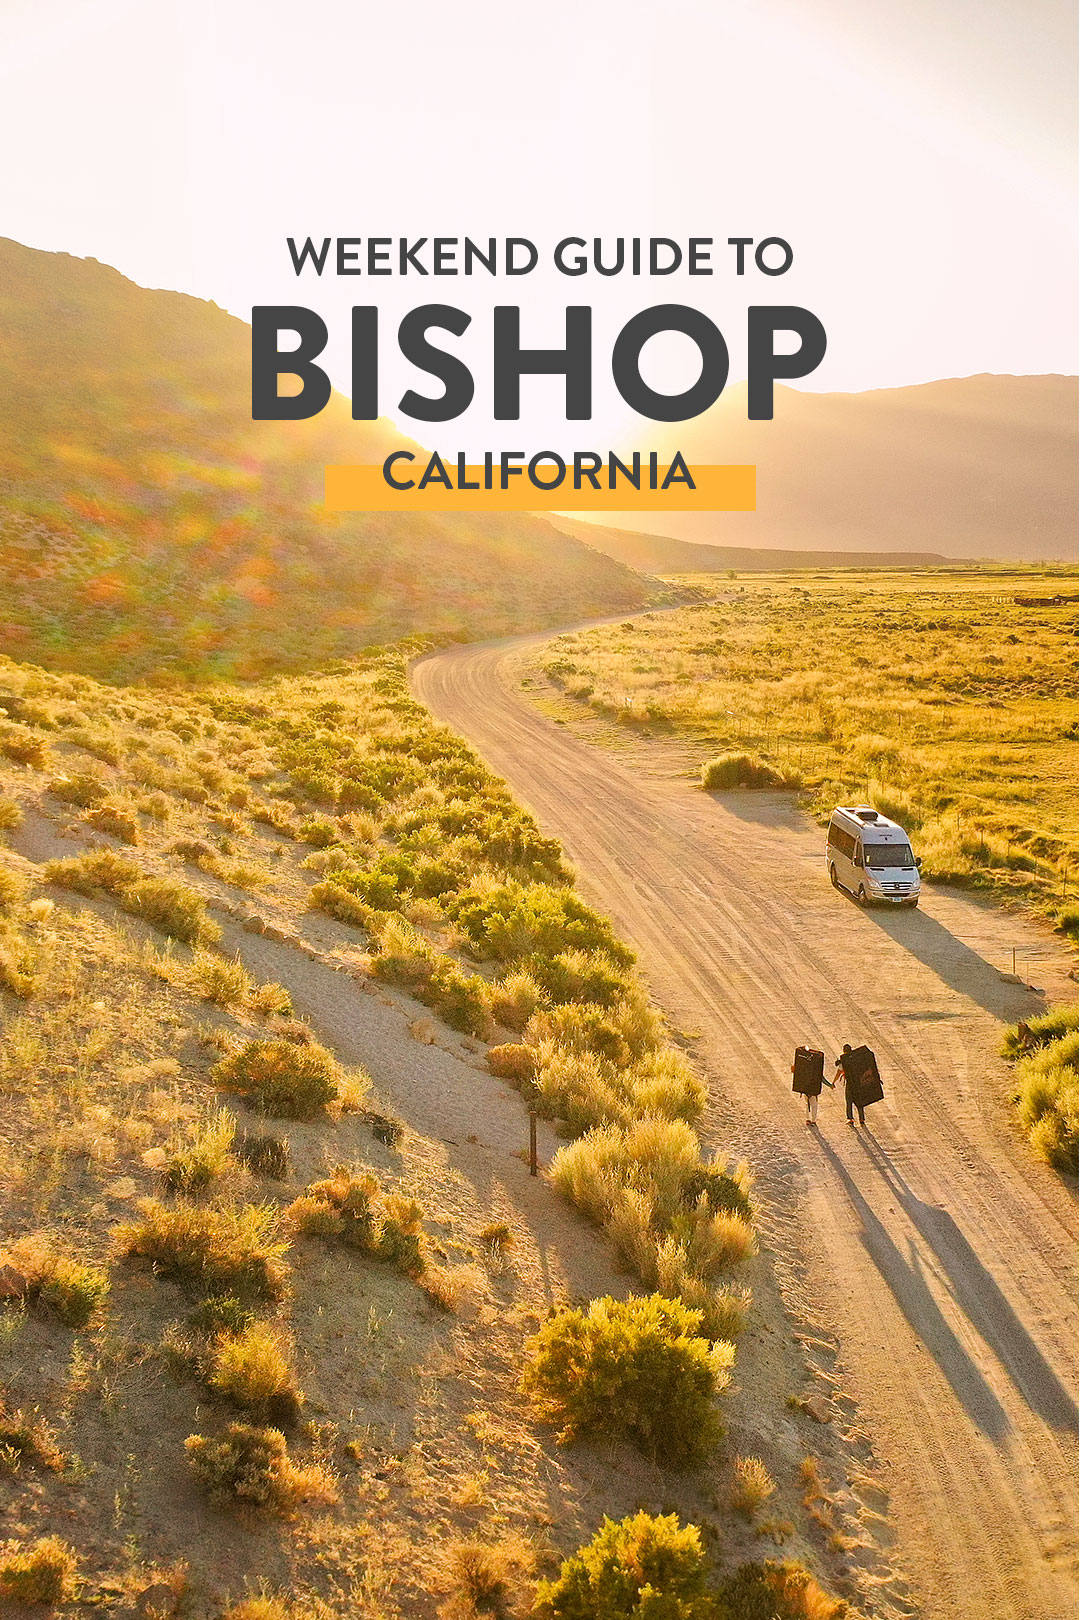 15 Things to Do in Bishop - First Timer's Weekend Guide